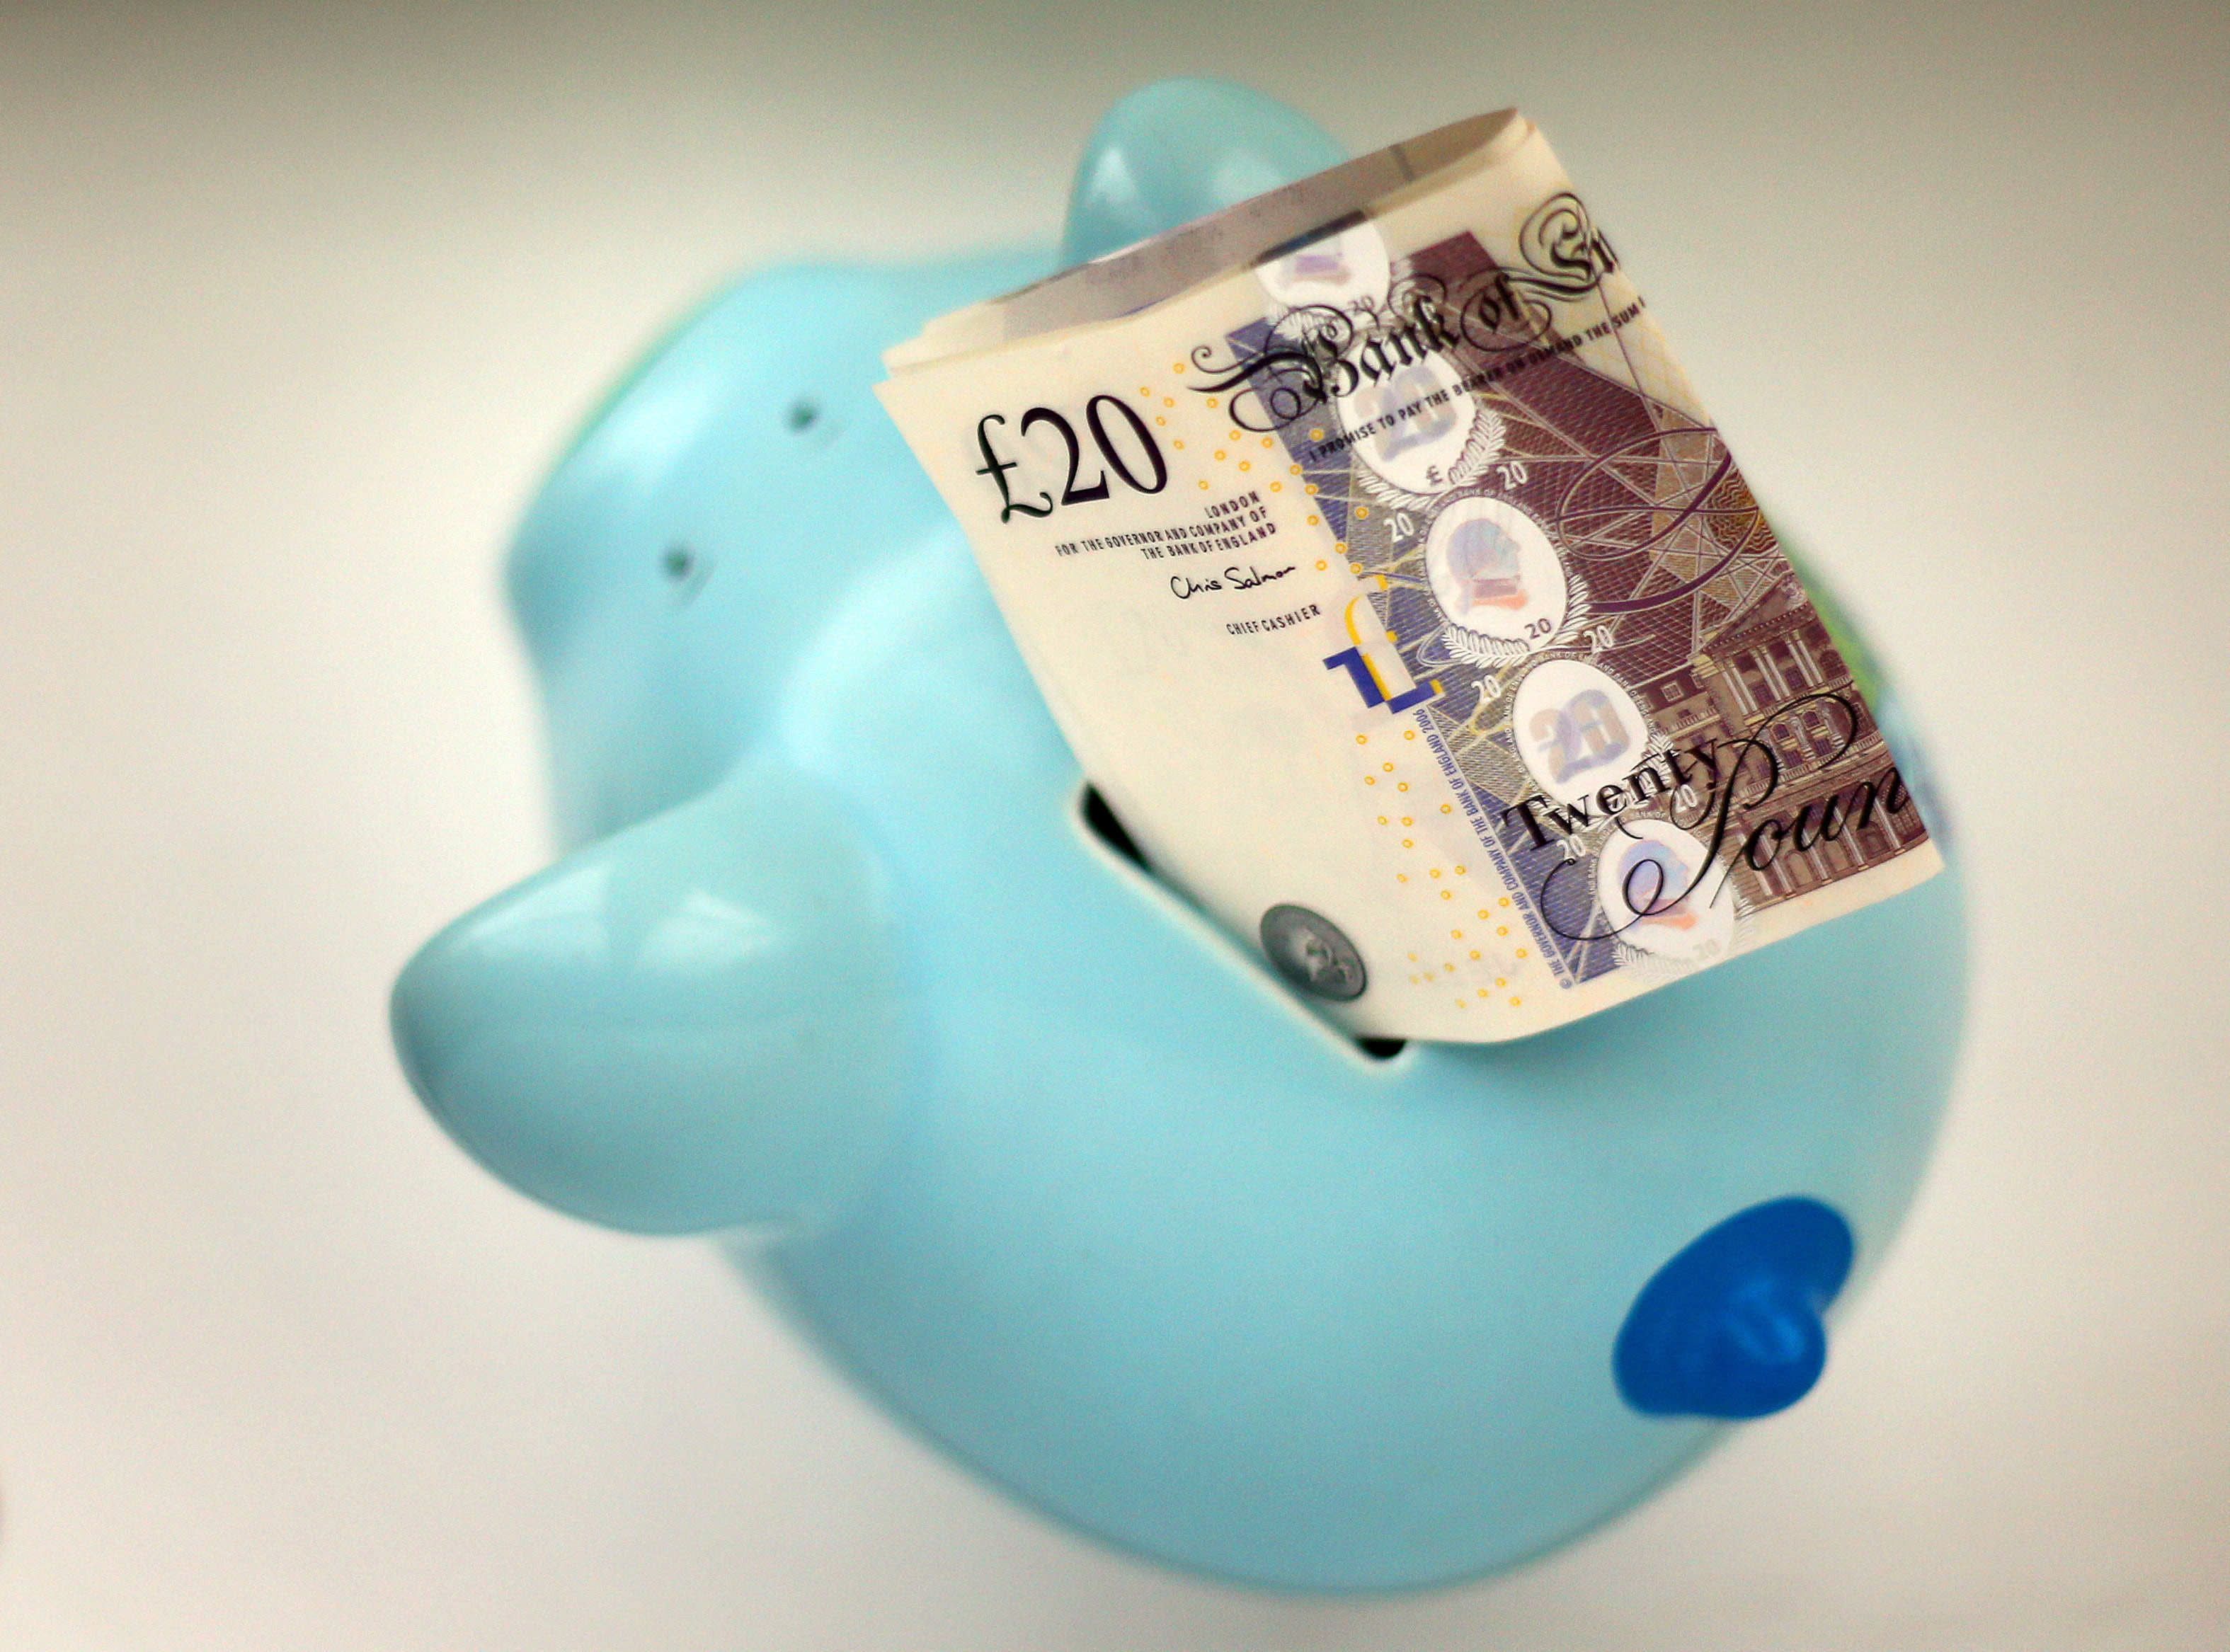 Stocks and shares Isas fall in popularity as savers opt for cash